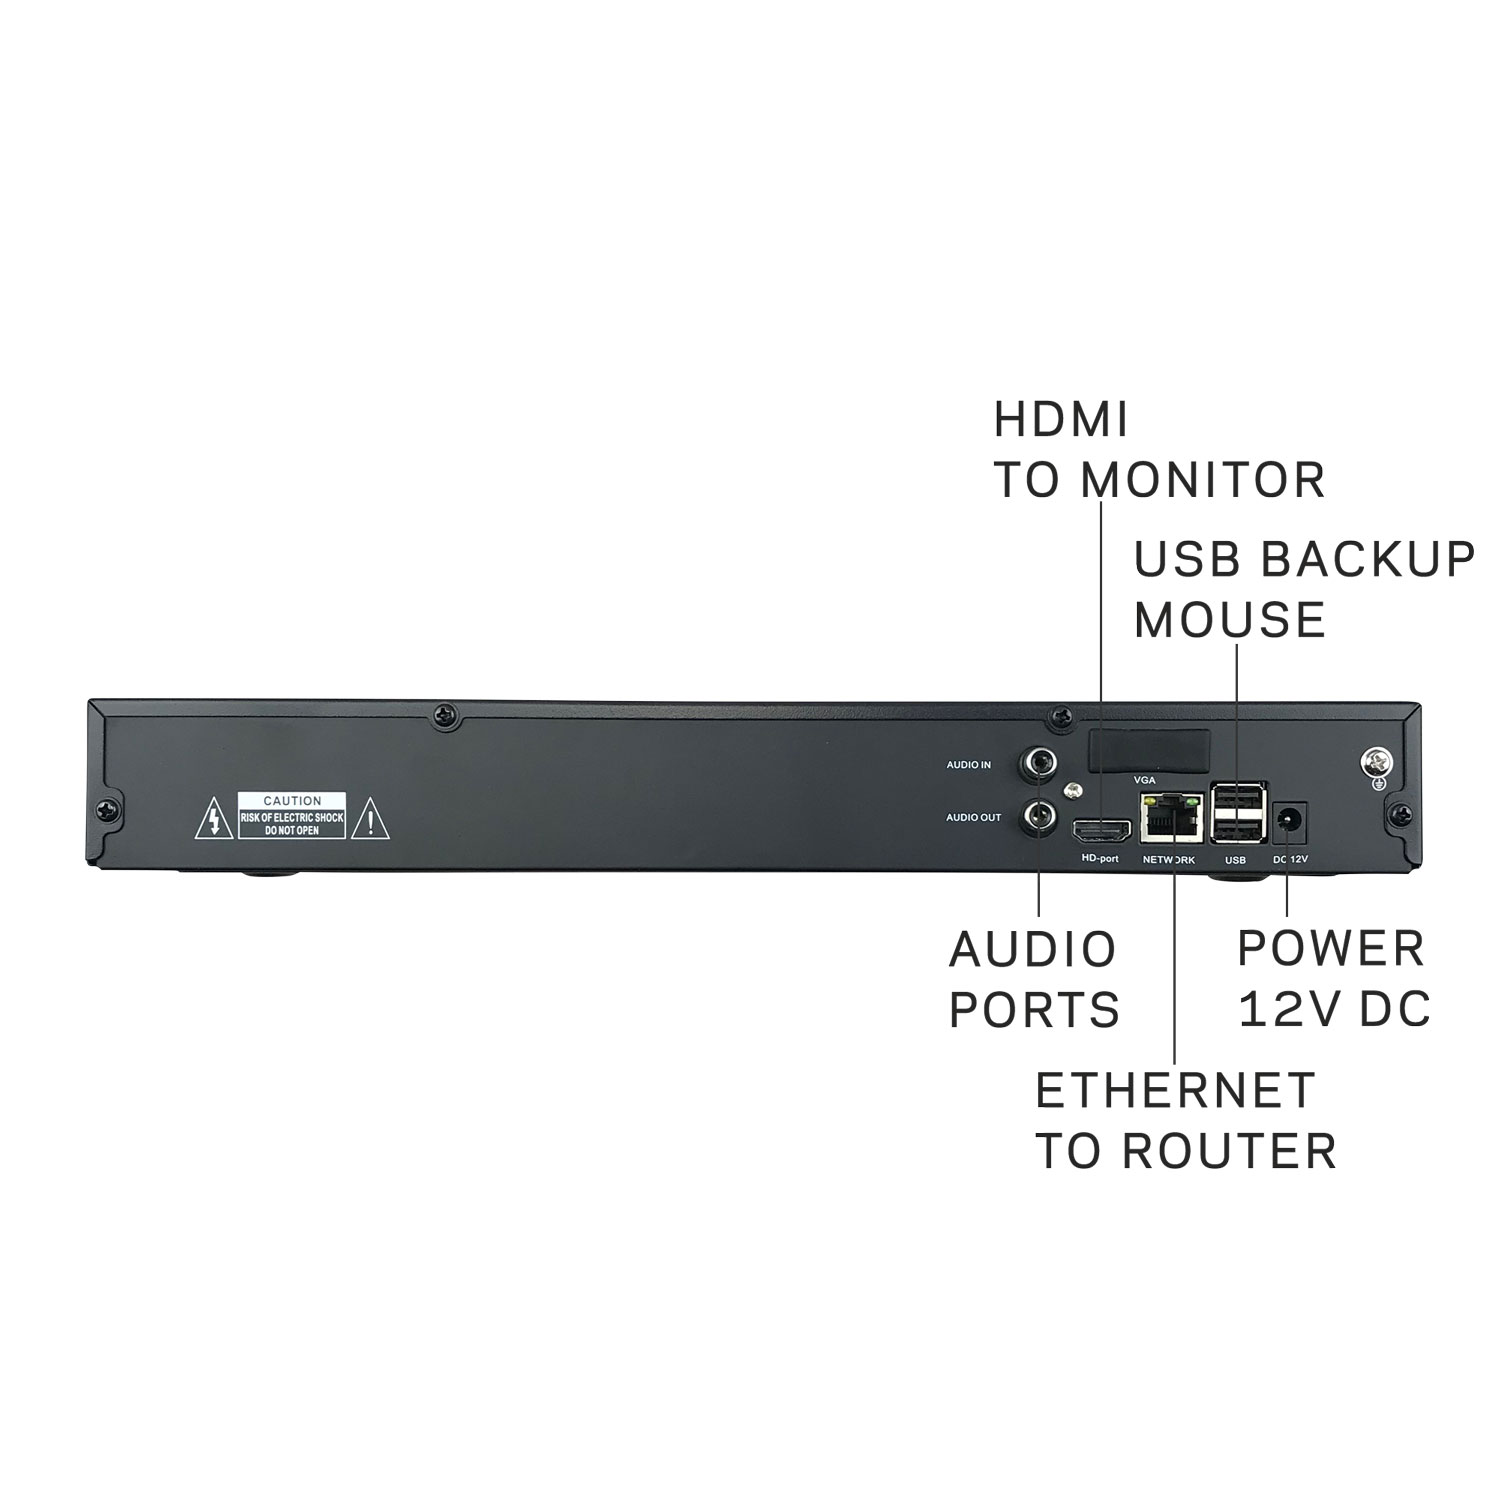 Microseven 4K NVR 8MP 16CH 1GB Port Compatible with Alexa, Security Network Video Recorder (1080p/3MP/4MP/5MP/6MP/8MP) Supports up to 16 x 8-Megapixel IP Cameras, Max. 8TB HDD 2 x SATA (Not Included)